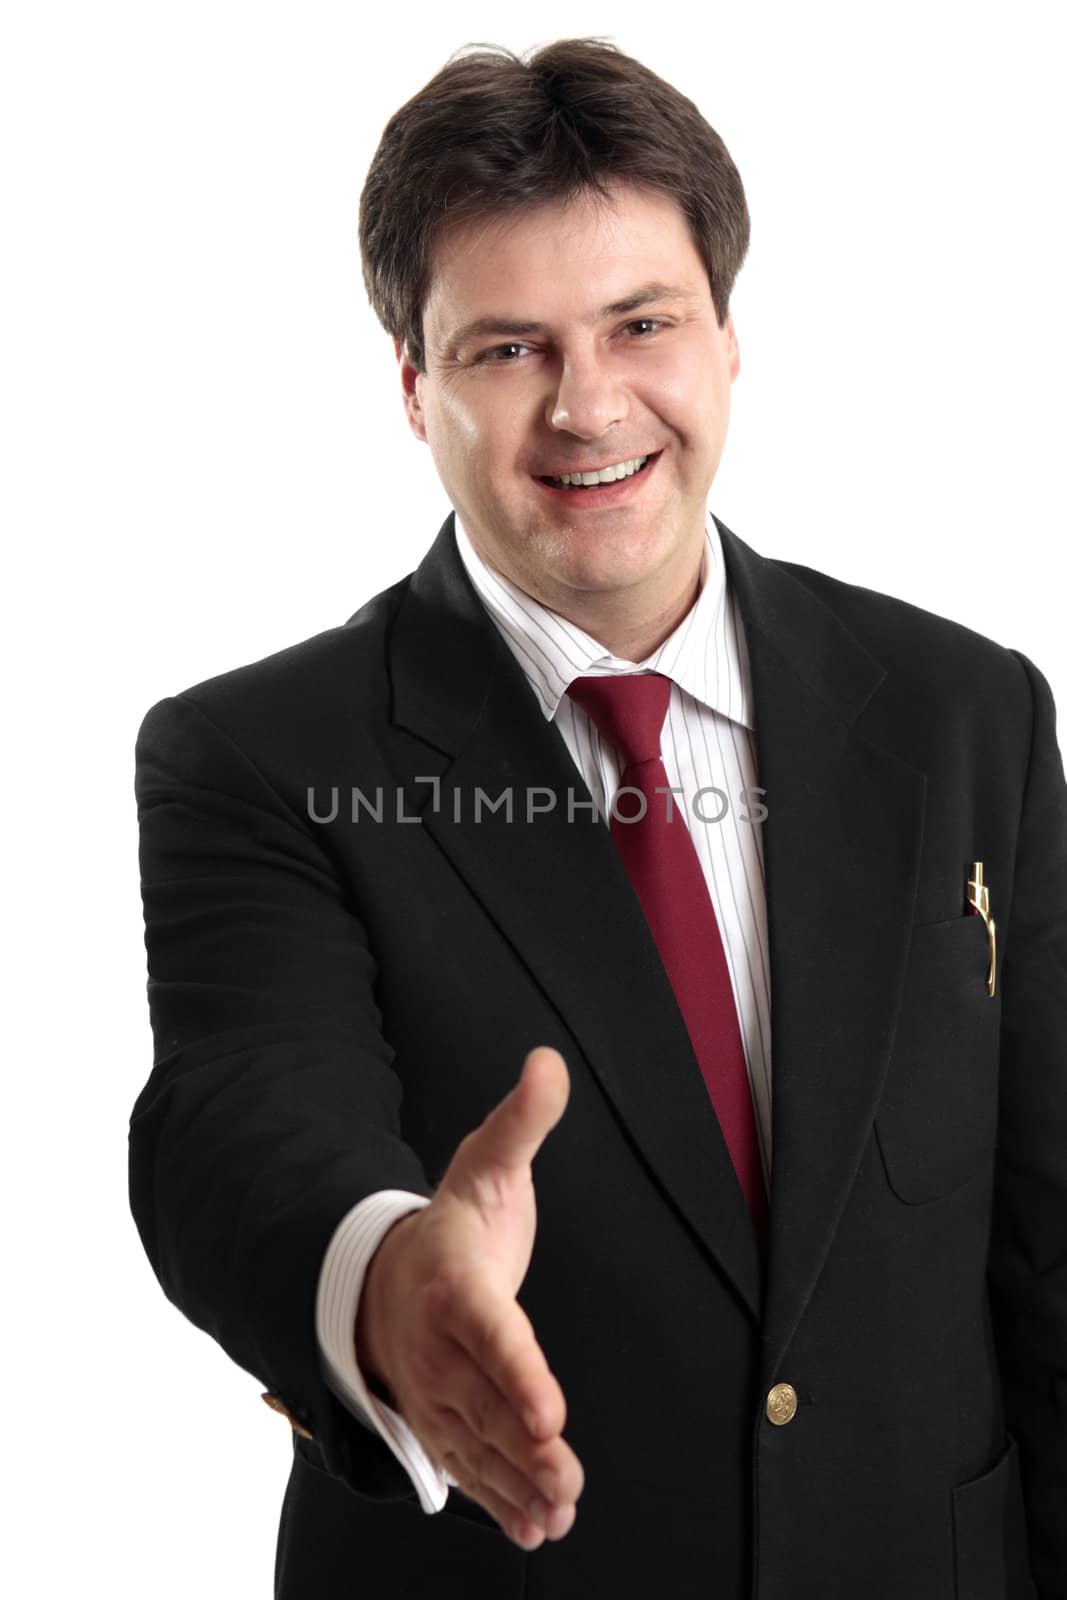 Businessman extends his hand to seal a deal or greeting a fellow colleague or businessman.